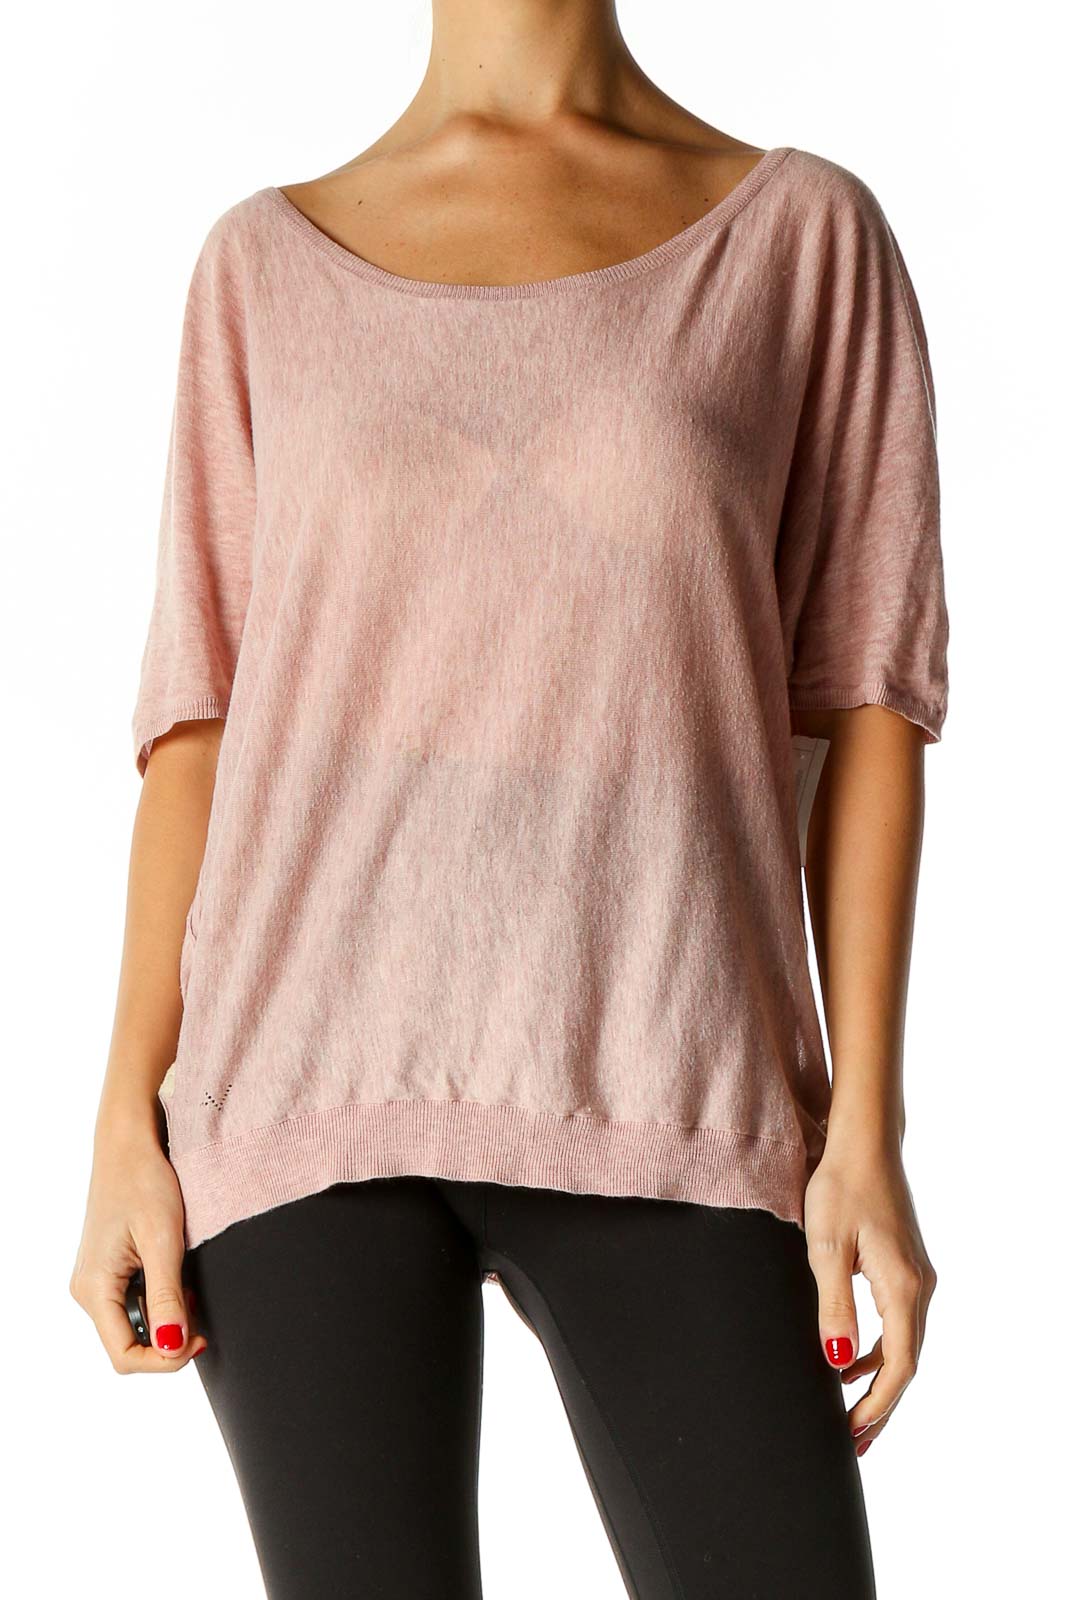 Pink Solid All Day Wear Sweater Front